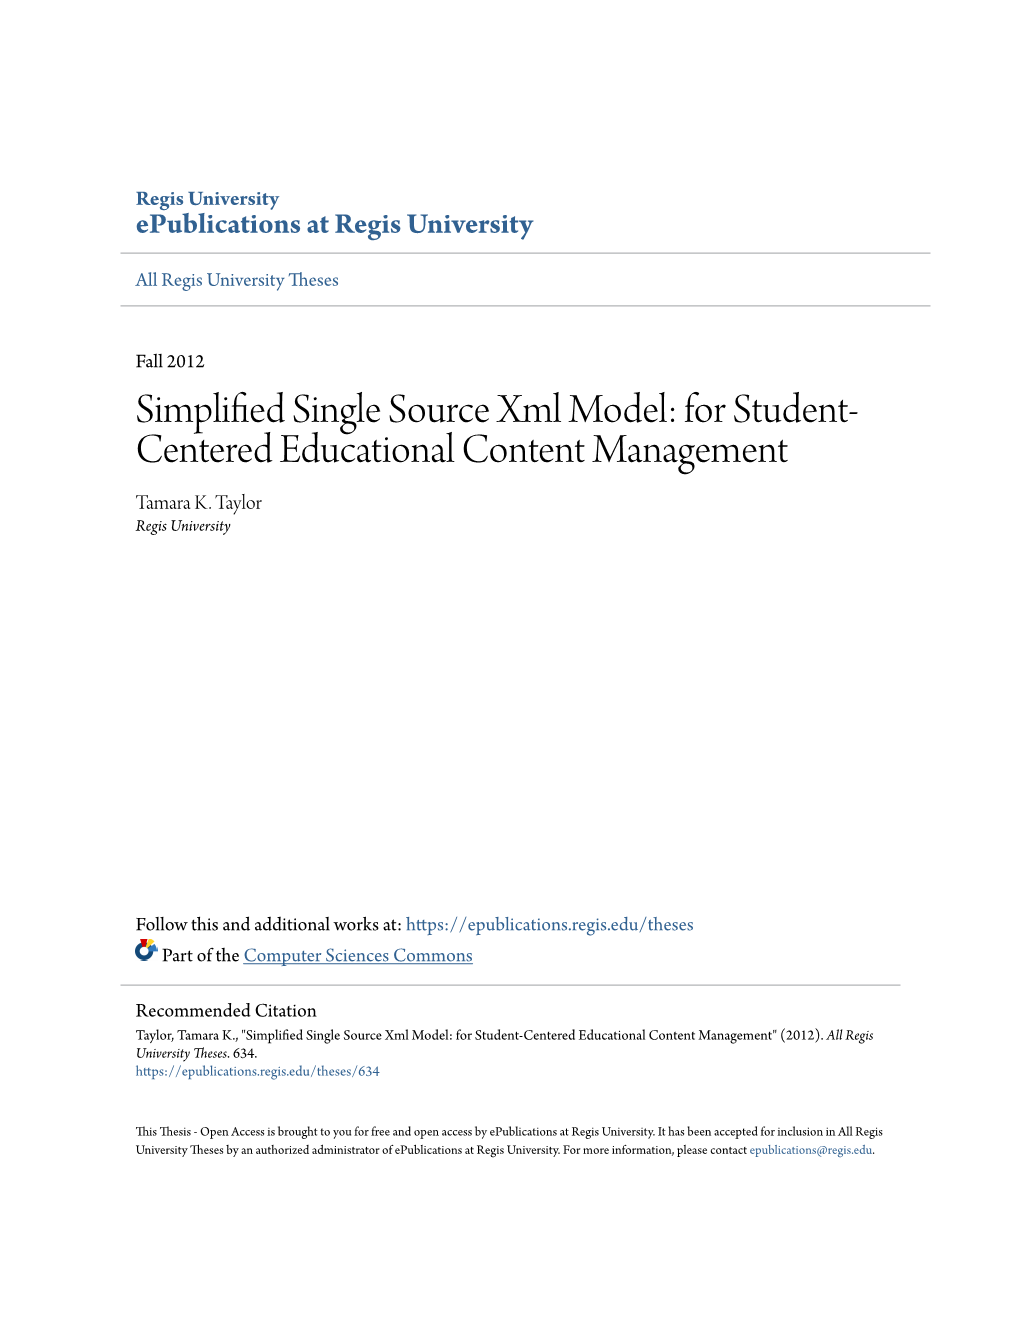 For Student-Centered Educational Content Management" (2012)